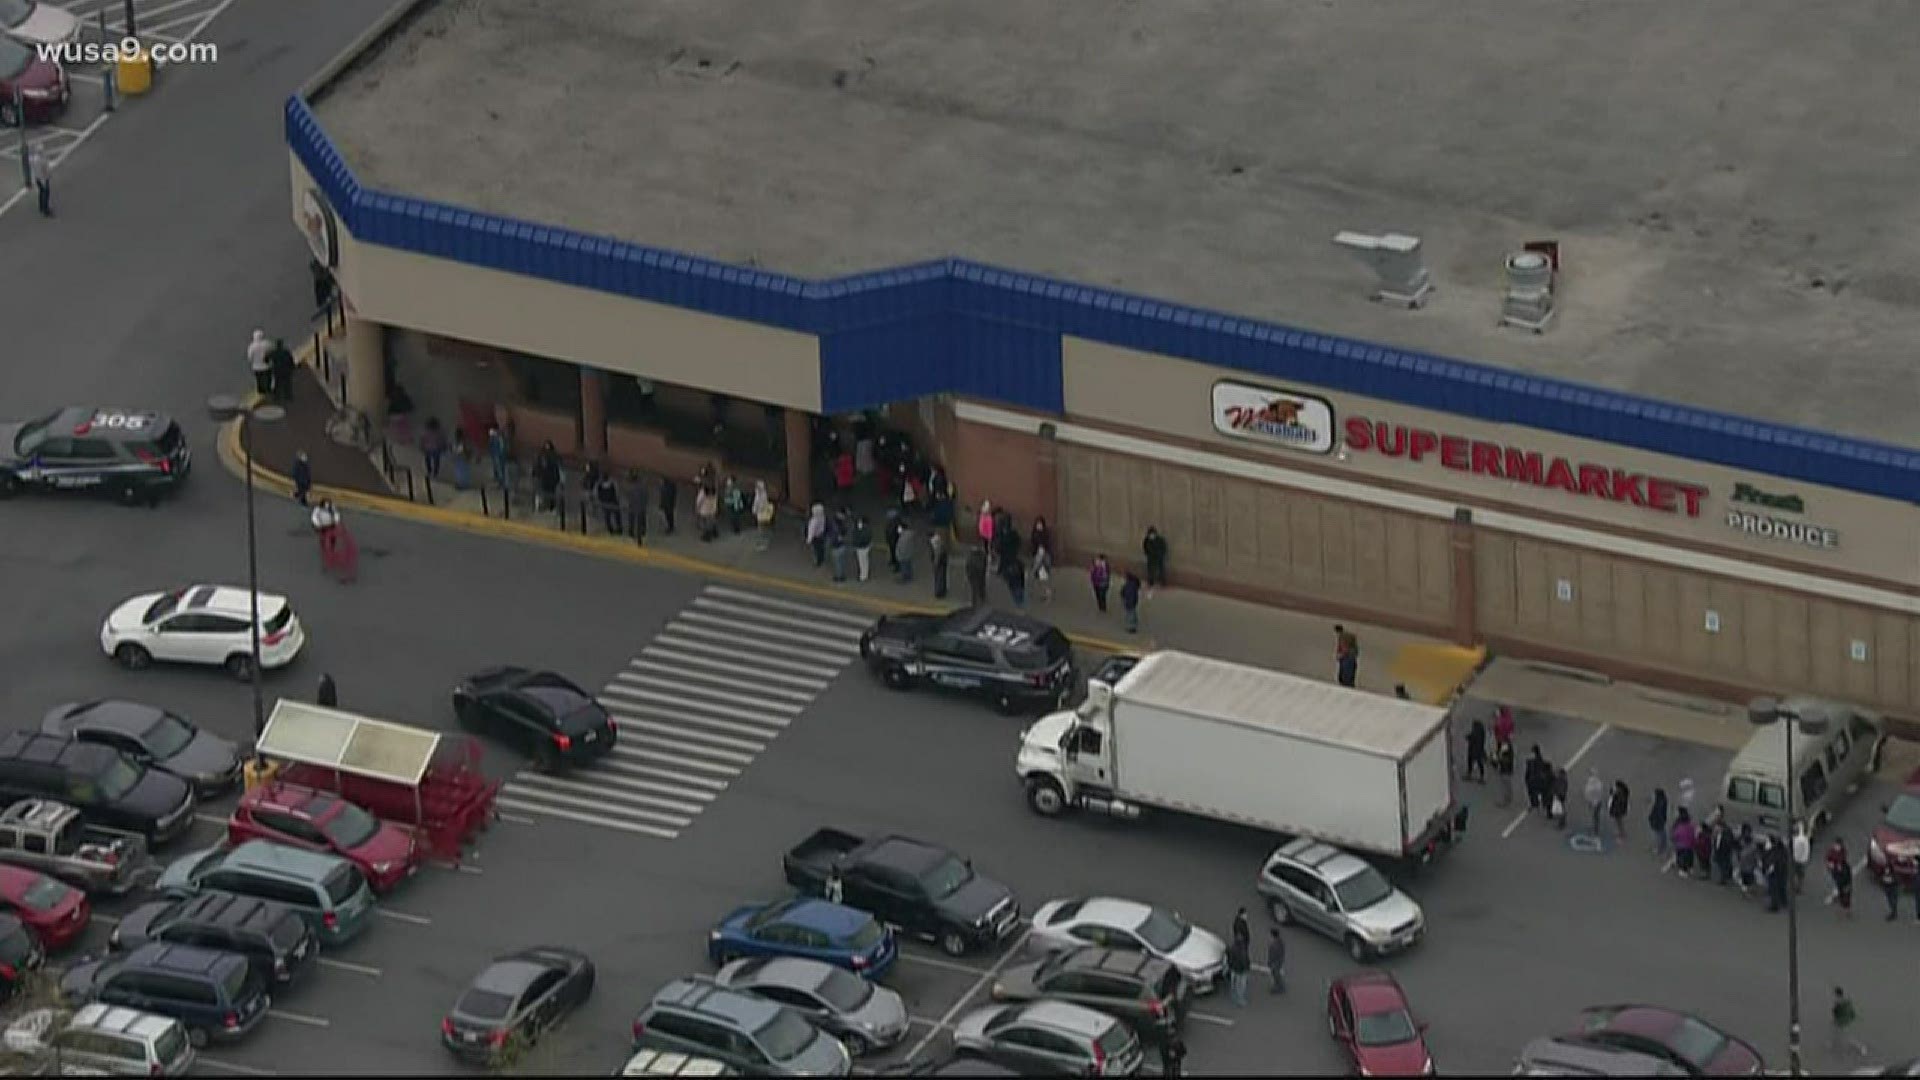 Dozens of people lined up for a grocery giveaway, with a seeming disregard for social distancing guidelines